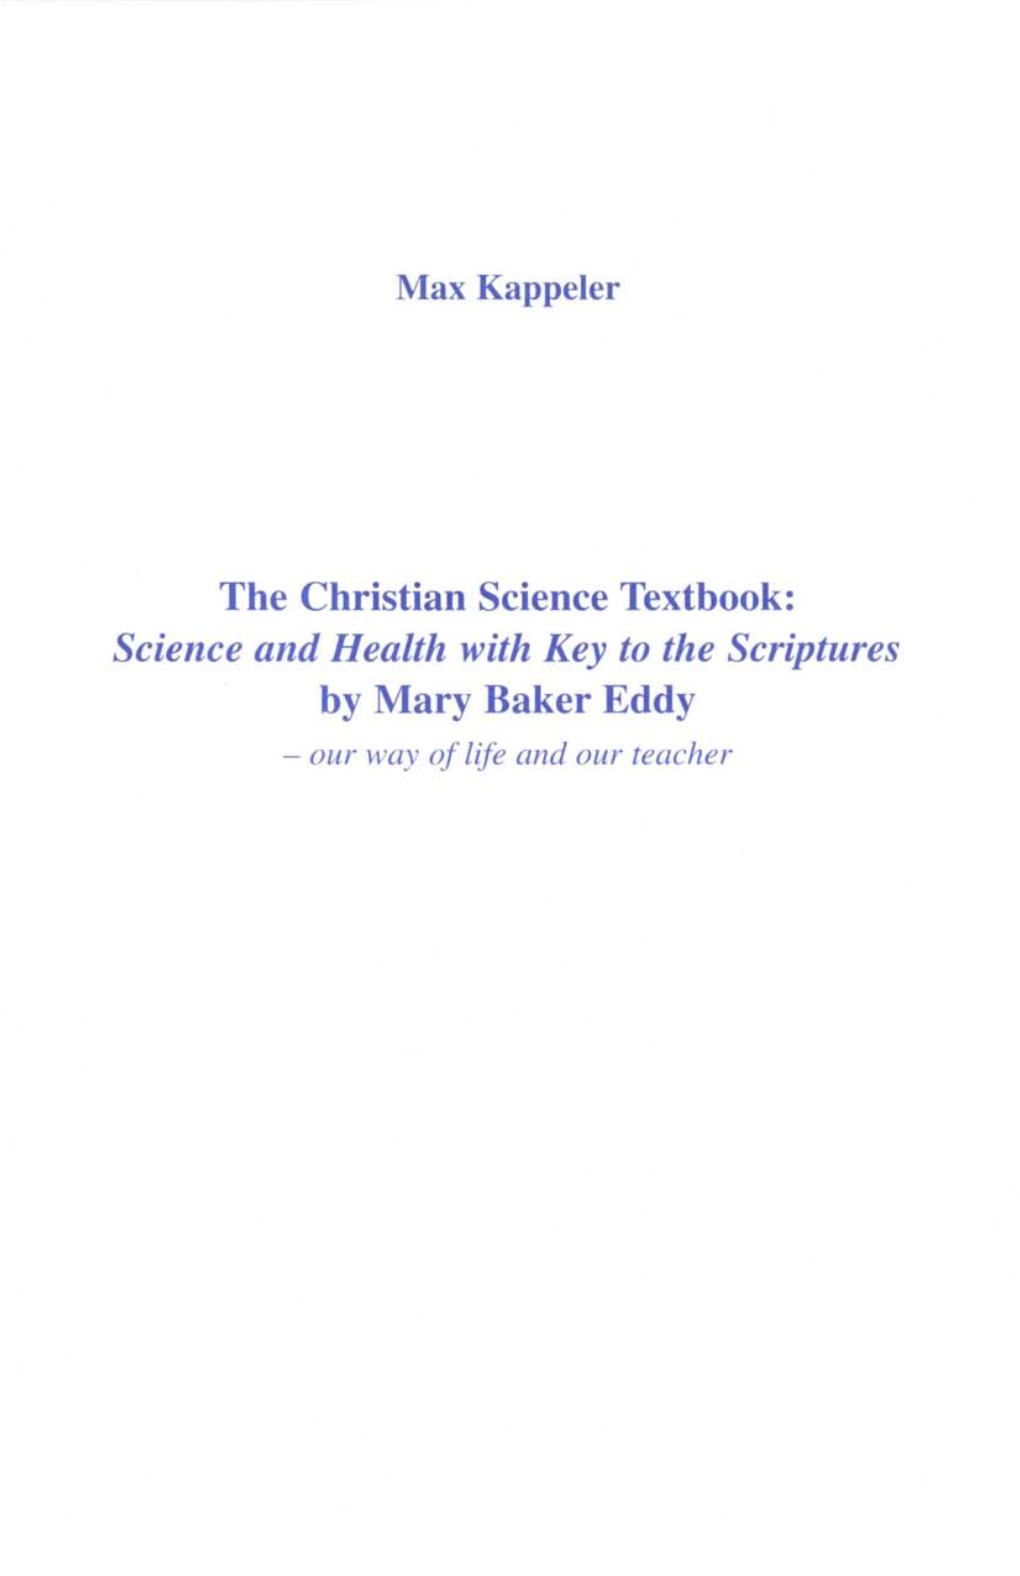 The Christian Science Textbook: by Mary Baker Eddy